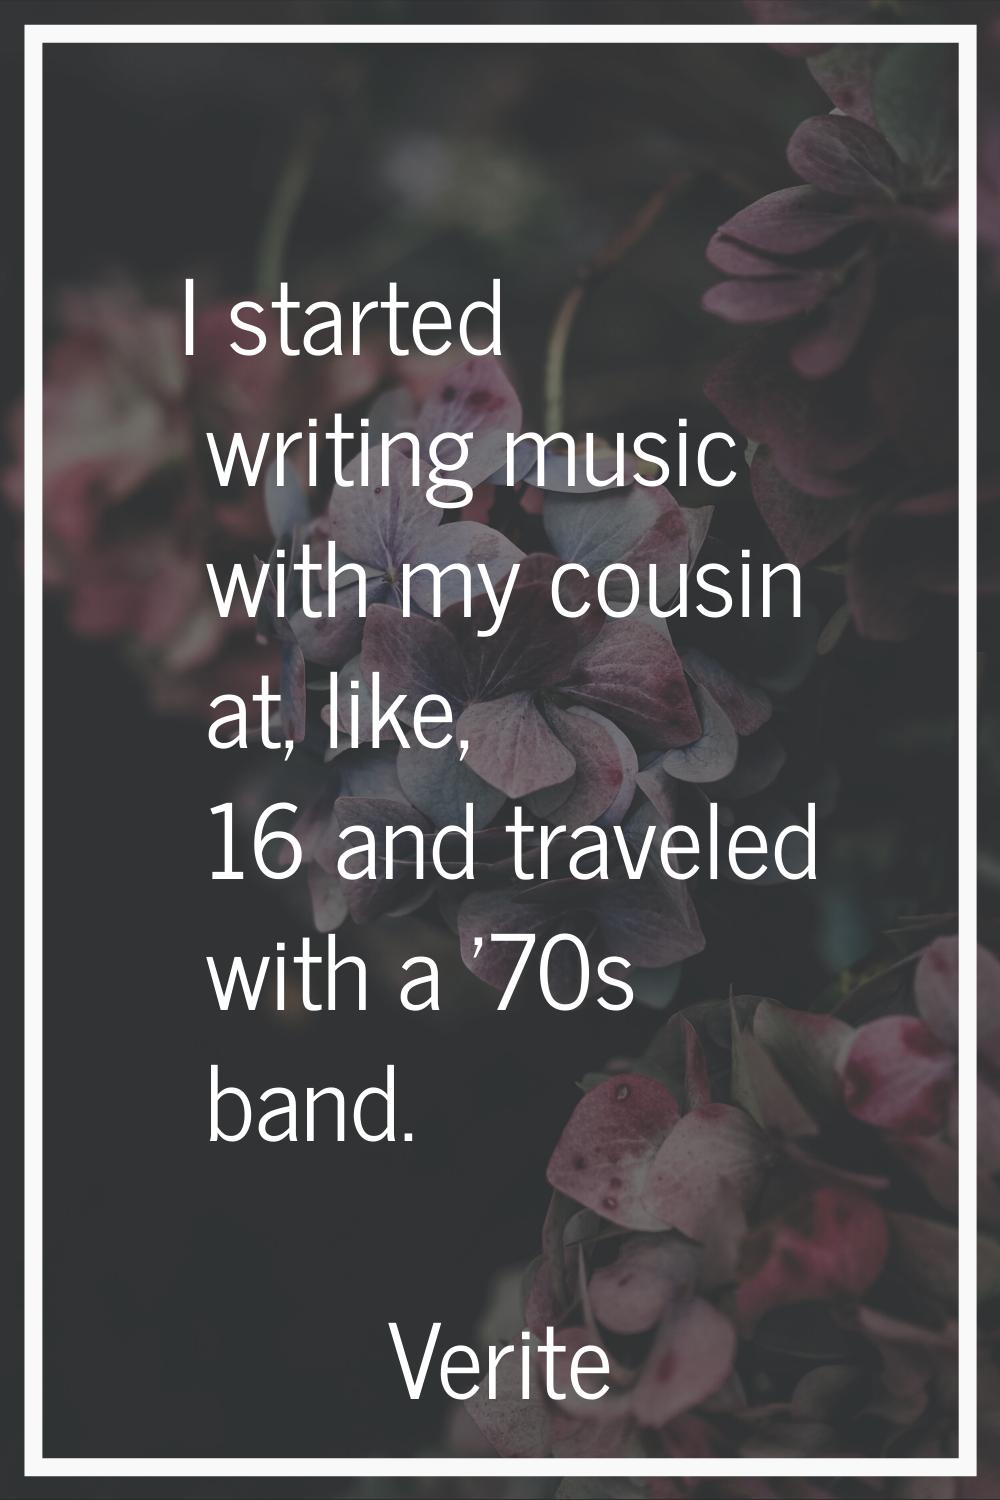 I started writing music with my cousin at, like, 16 and traveled with a '70s band.